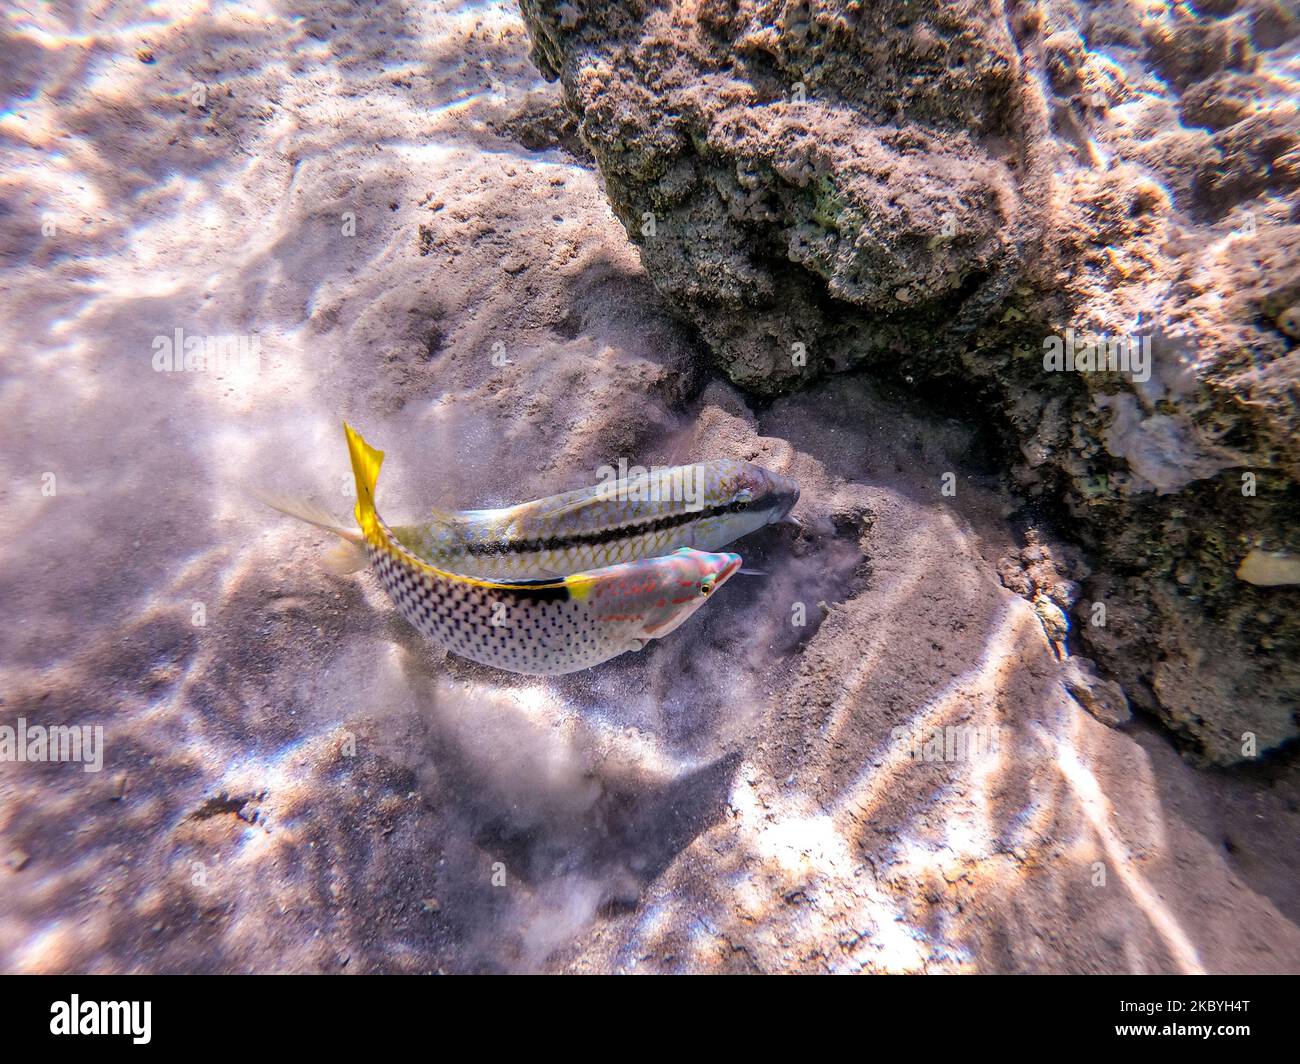 Tropical Forsskal goatfish known as Parupeneus forskali and Checkerboard wrasse known as Halichoeres hortulanus underwater on sand sea bottom at the Stock Photo